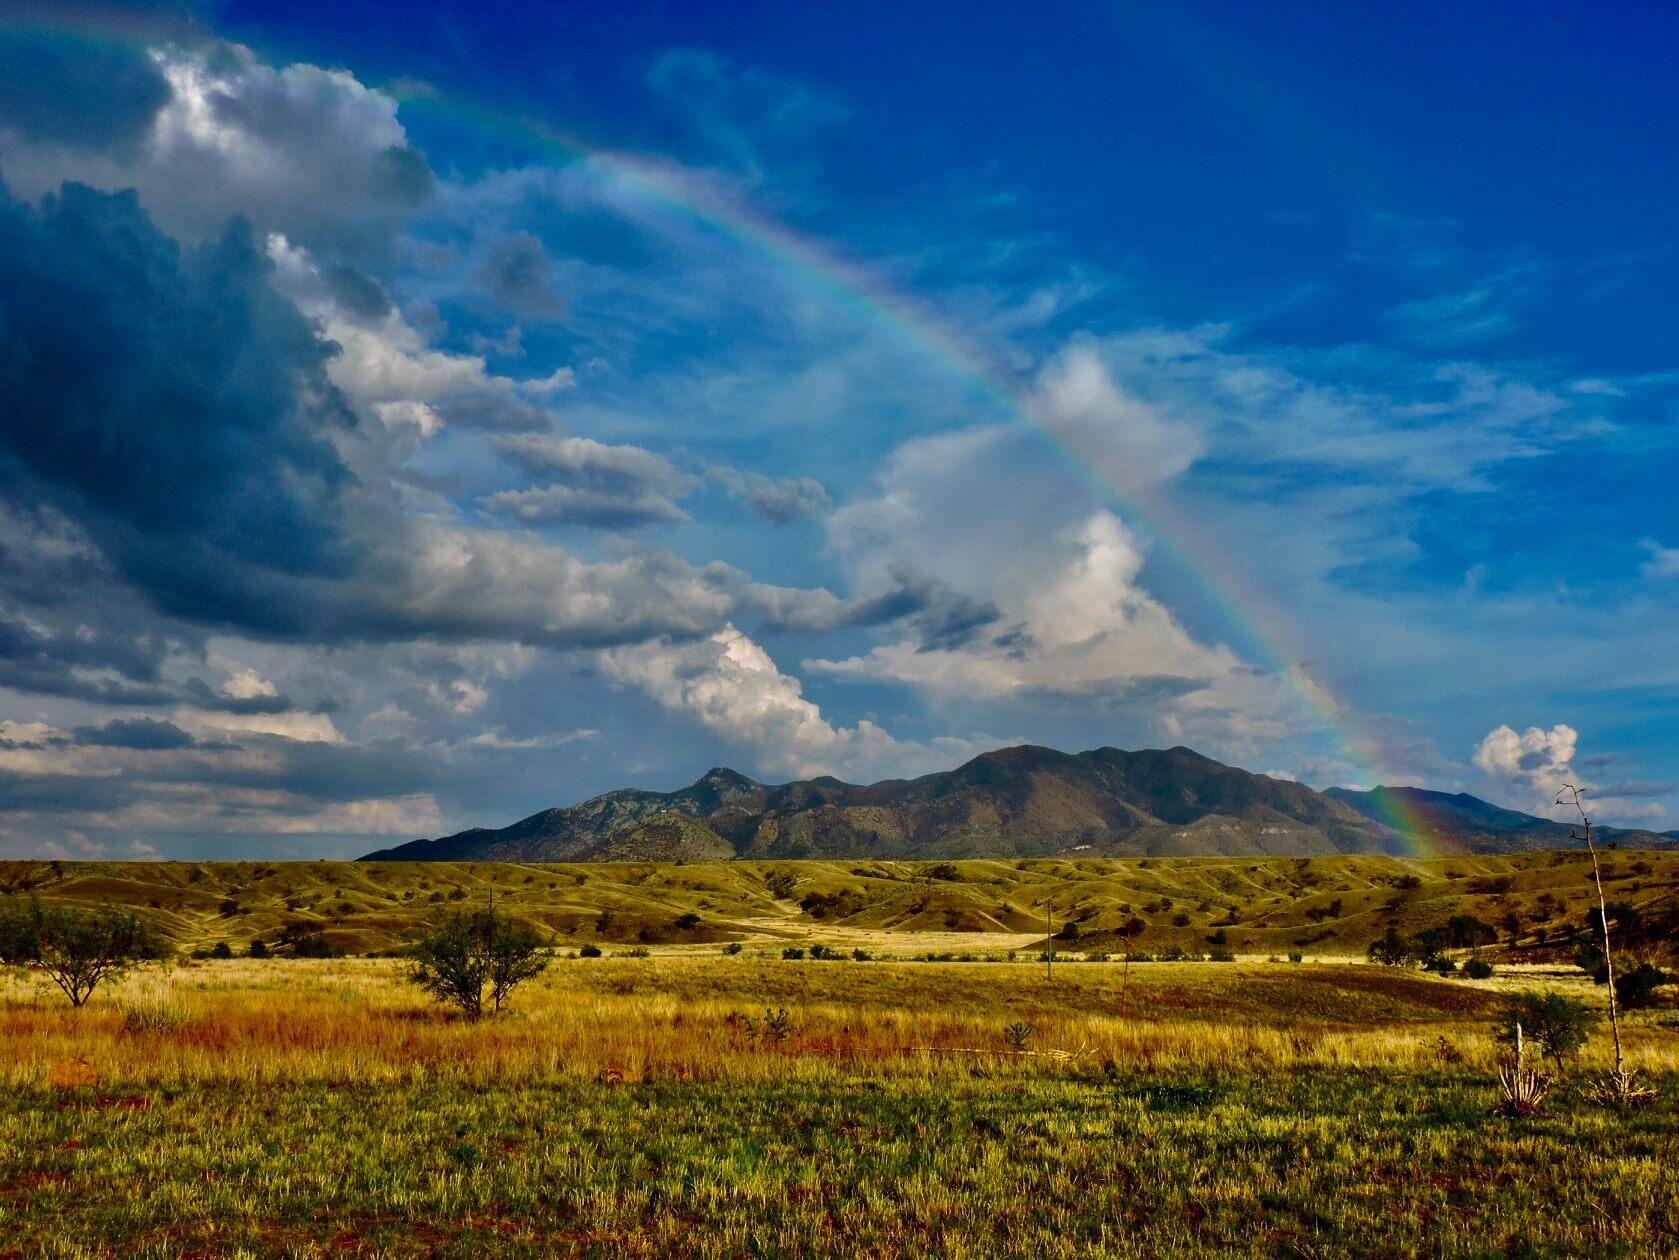 A rainbow cuts through partly cloudy skies in front of the Huachuca Mountains on the Appleton-Whittell Research Ranch, greening grass standing as evidence of the storms that have recently passed.